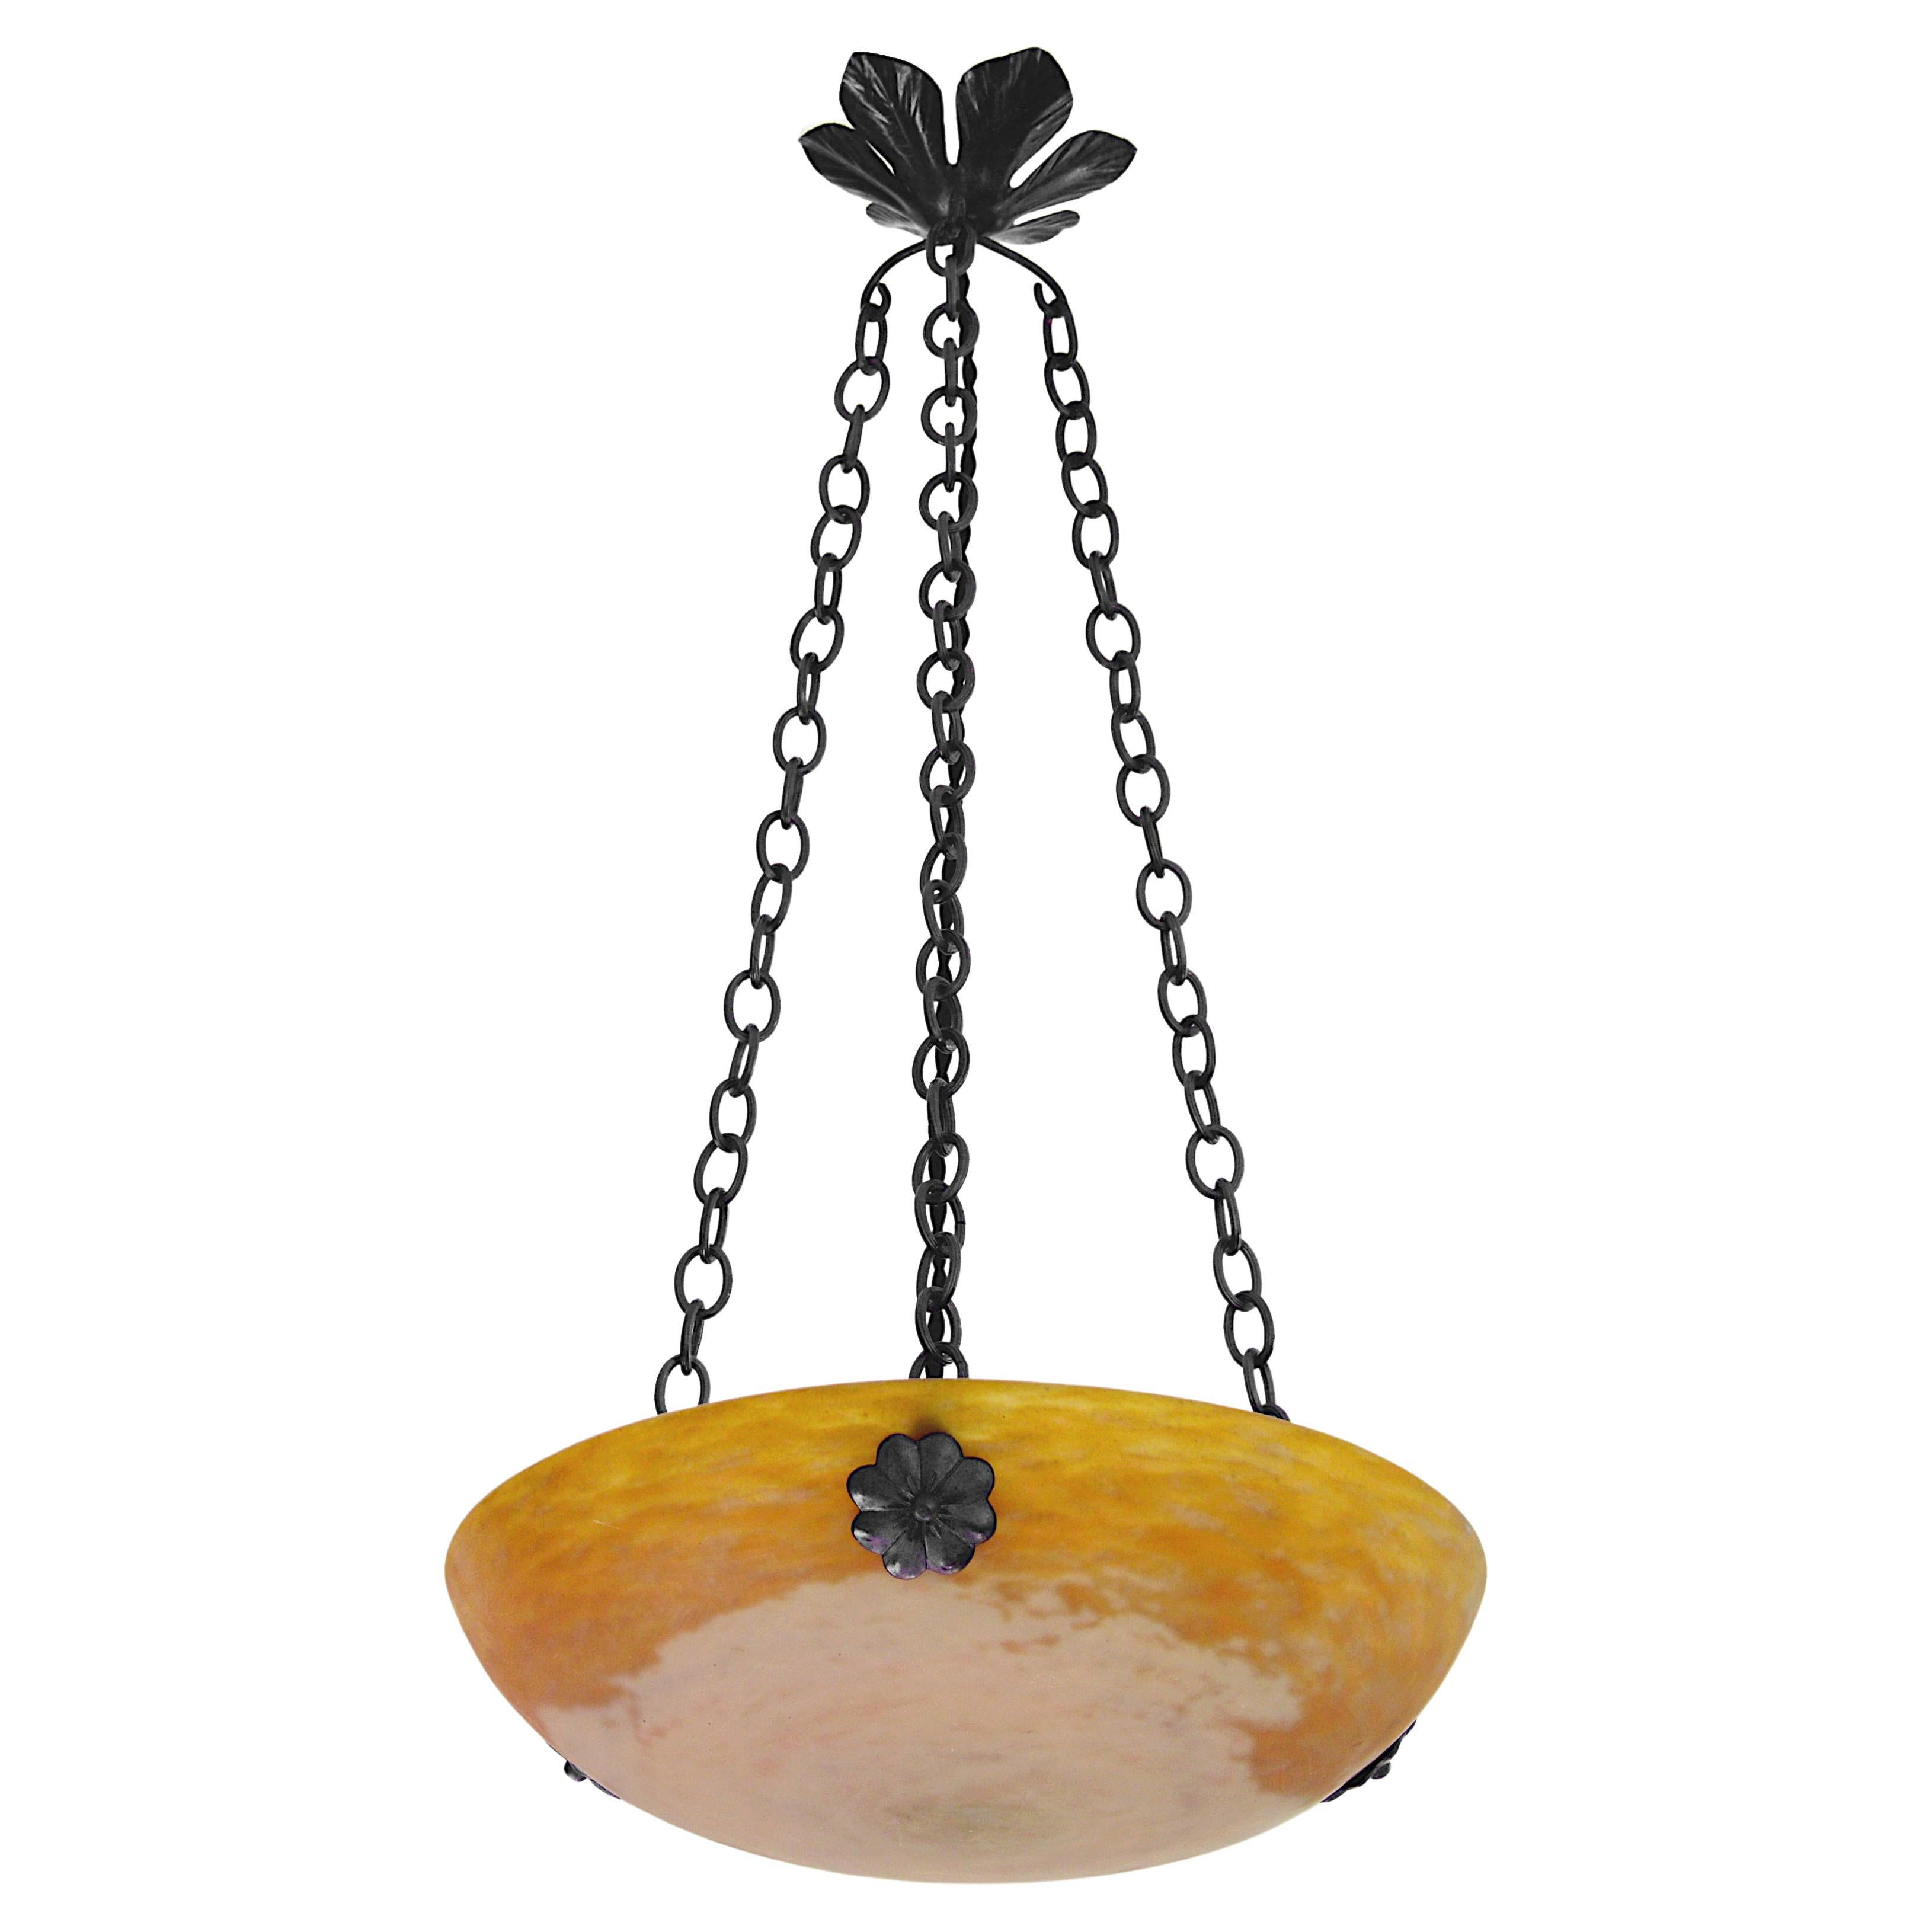 French pendant chandelier by Daum (Nancy), France, 1900-1905. Blown double glass shade hung at its original wrought iron frame. Colors: ochre, white sand and pink. Height 26.2